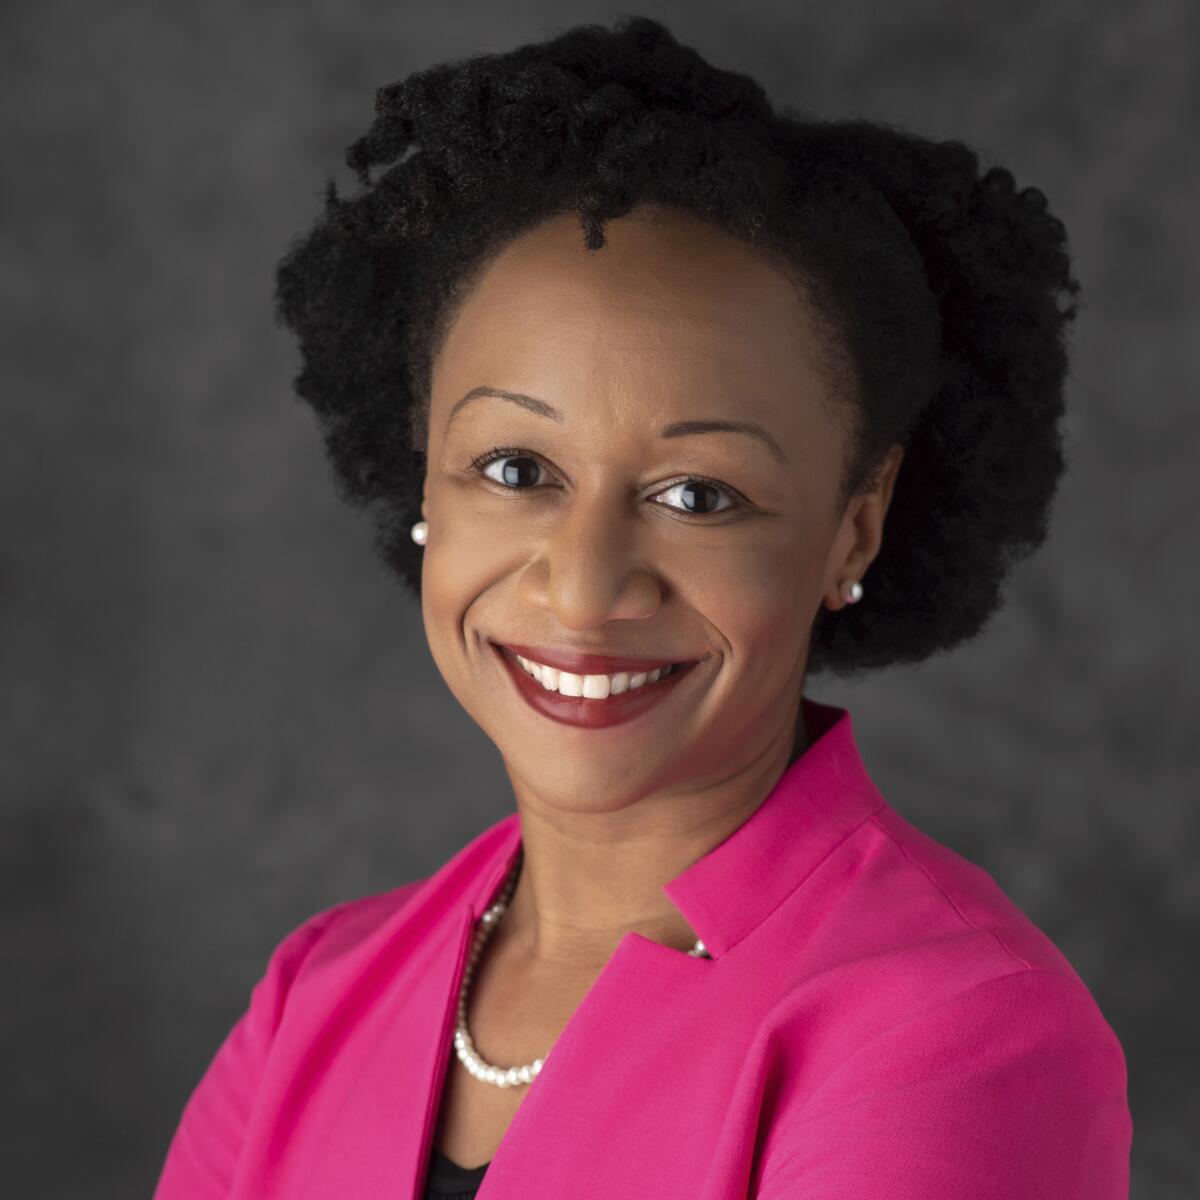 This undated photo provided by CVS in May 2022 shows Dr. Joneigh Khaldun. The new chief health equity officer at CVS Health hopes she will have more influence in fixing care disparities before they land patients in the hospital. Dr. Joneigh Khaldun sees those disparities play out routinely as an emergency physician. She says she is focused on giving everyone a fair chance to be as healthy as possible. (Tracy Grosshans/CVS via AP)